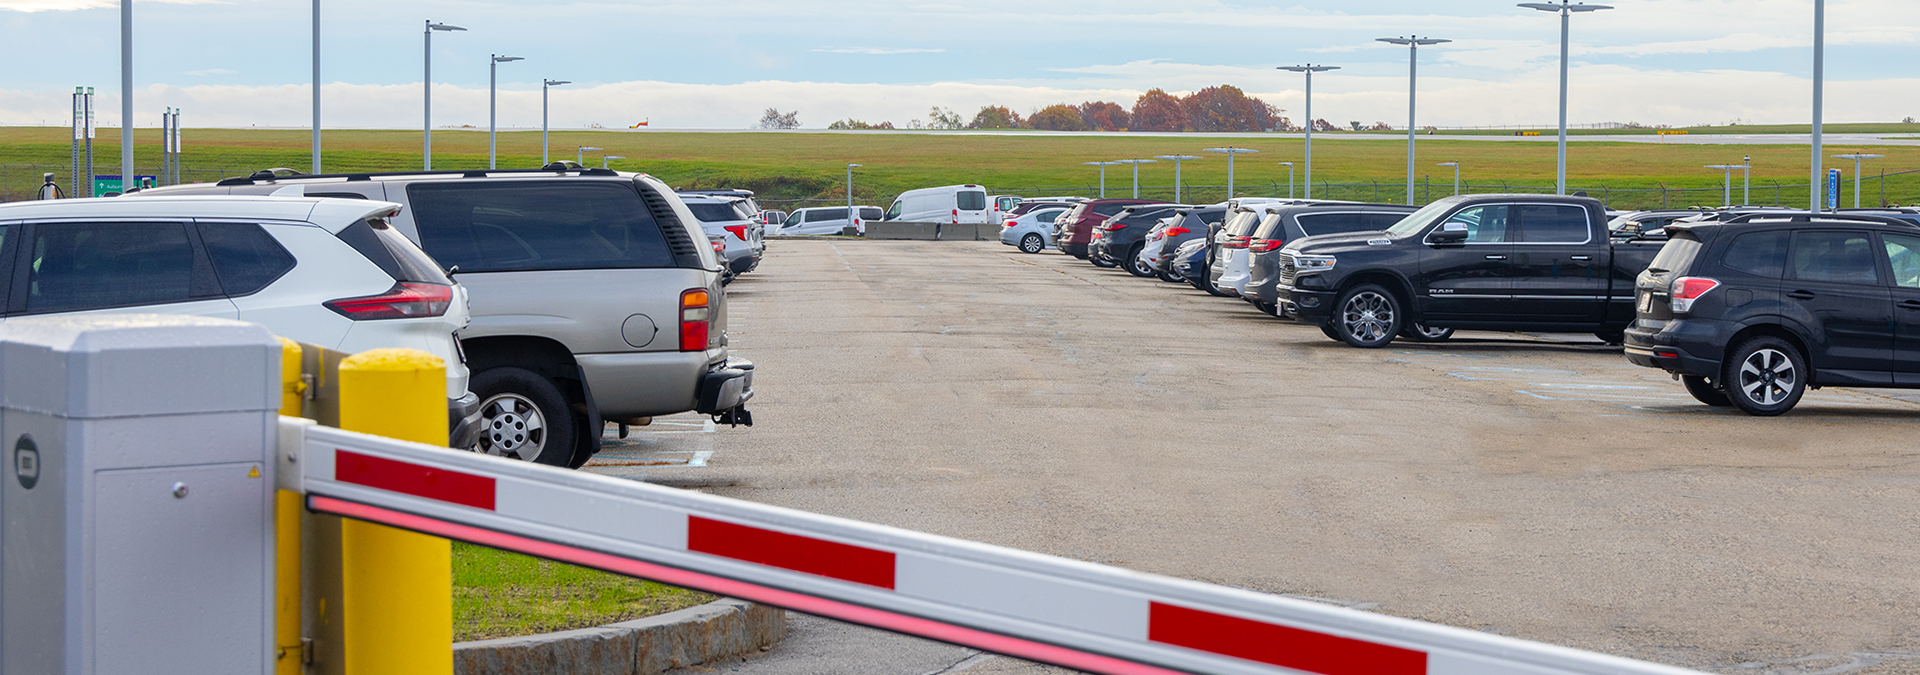 Parking at Worcester Regional Airport